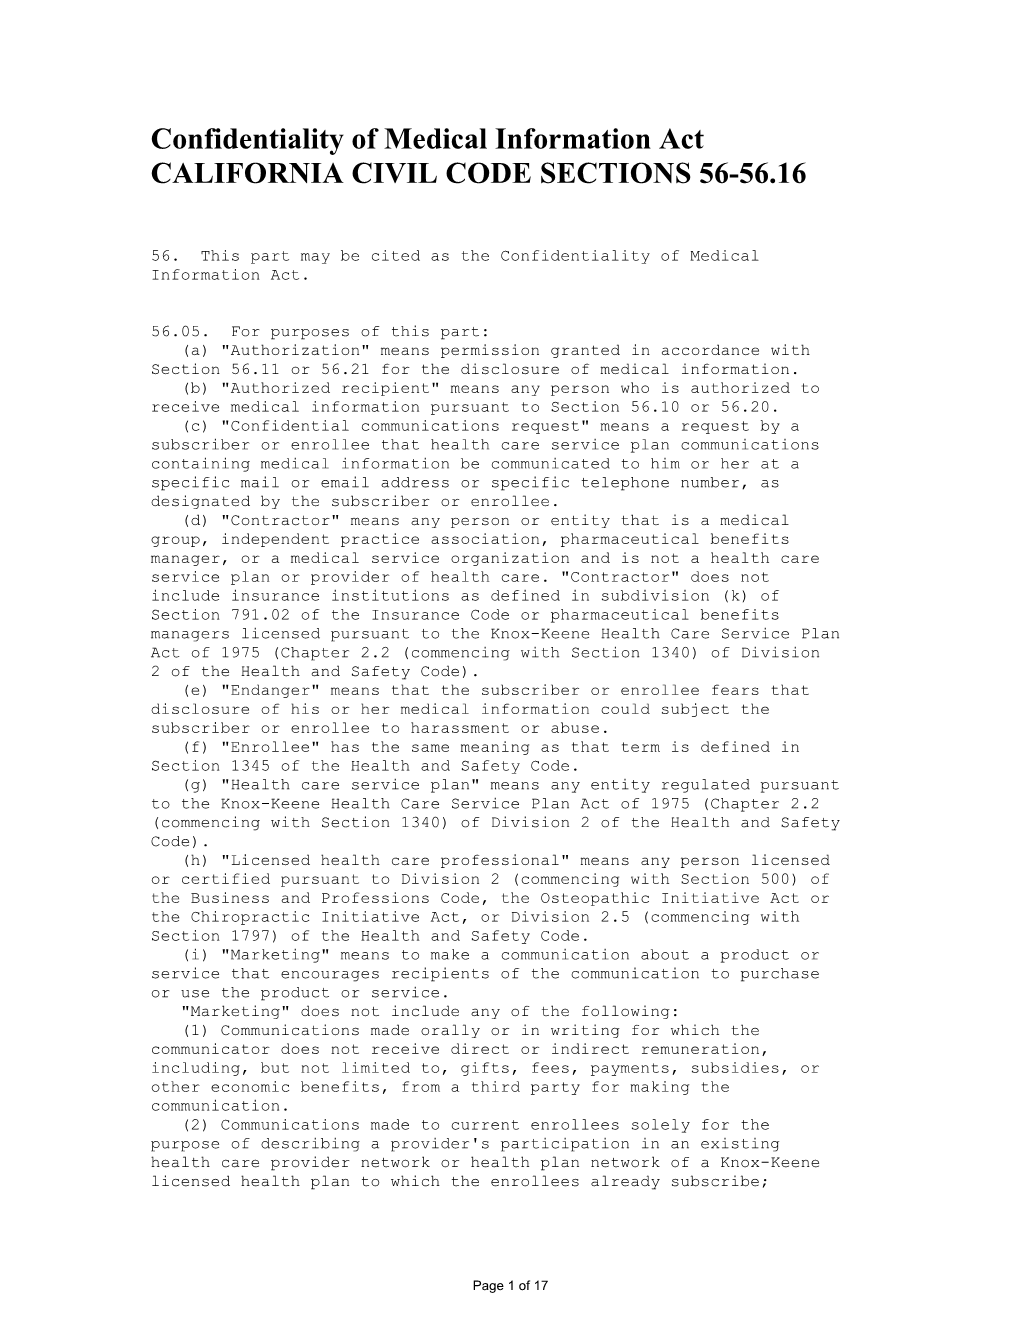 Confidentiality of Medical Information Act CALIFORNIA CIVIL CODE SECTIONS 56-56.16